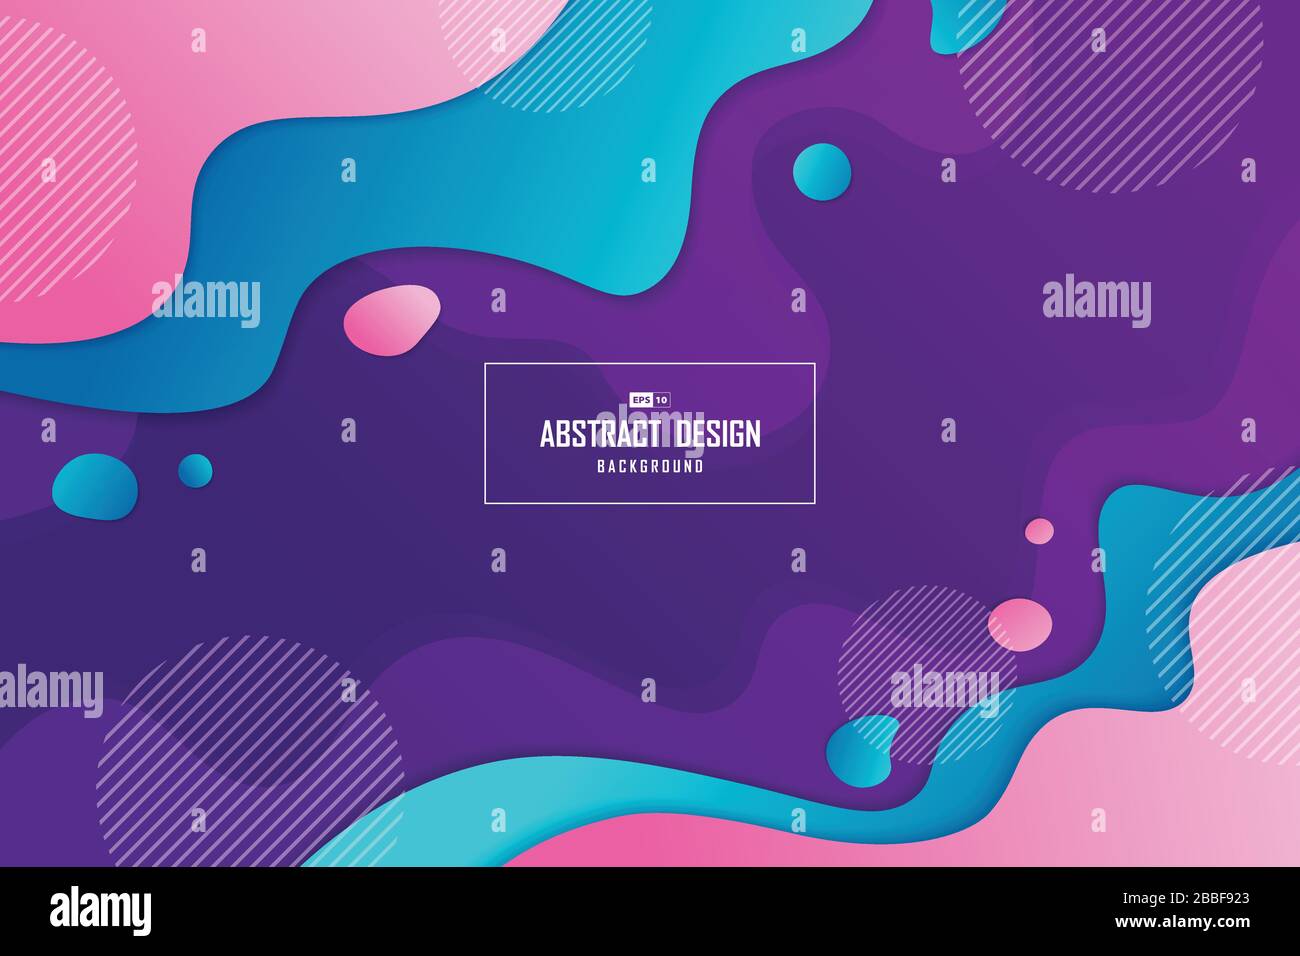 Abstract trendy abstract of fluid design shape element pattern artwork background. Use for ad, poster, artwork, template design. illustration vector e Stock Vector